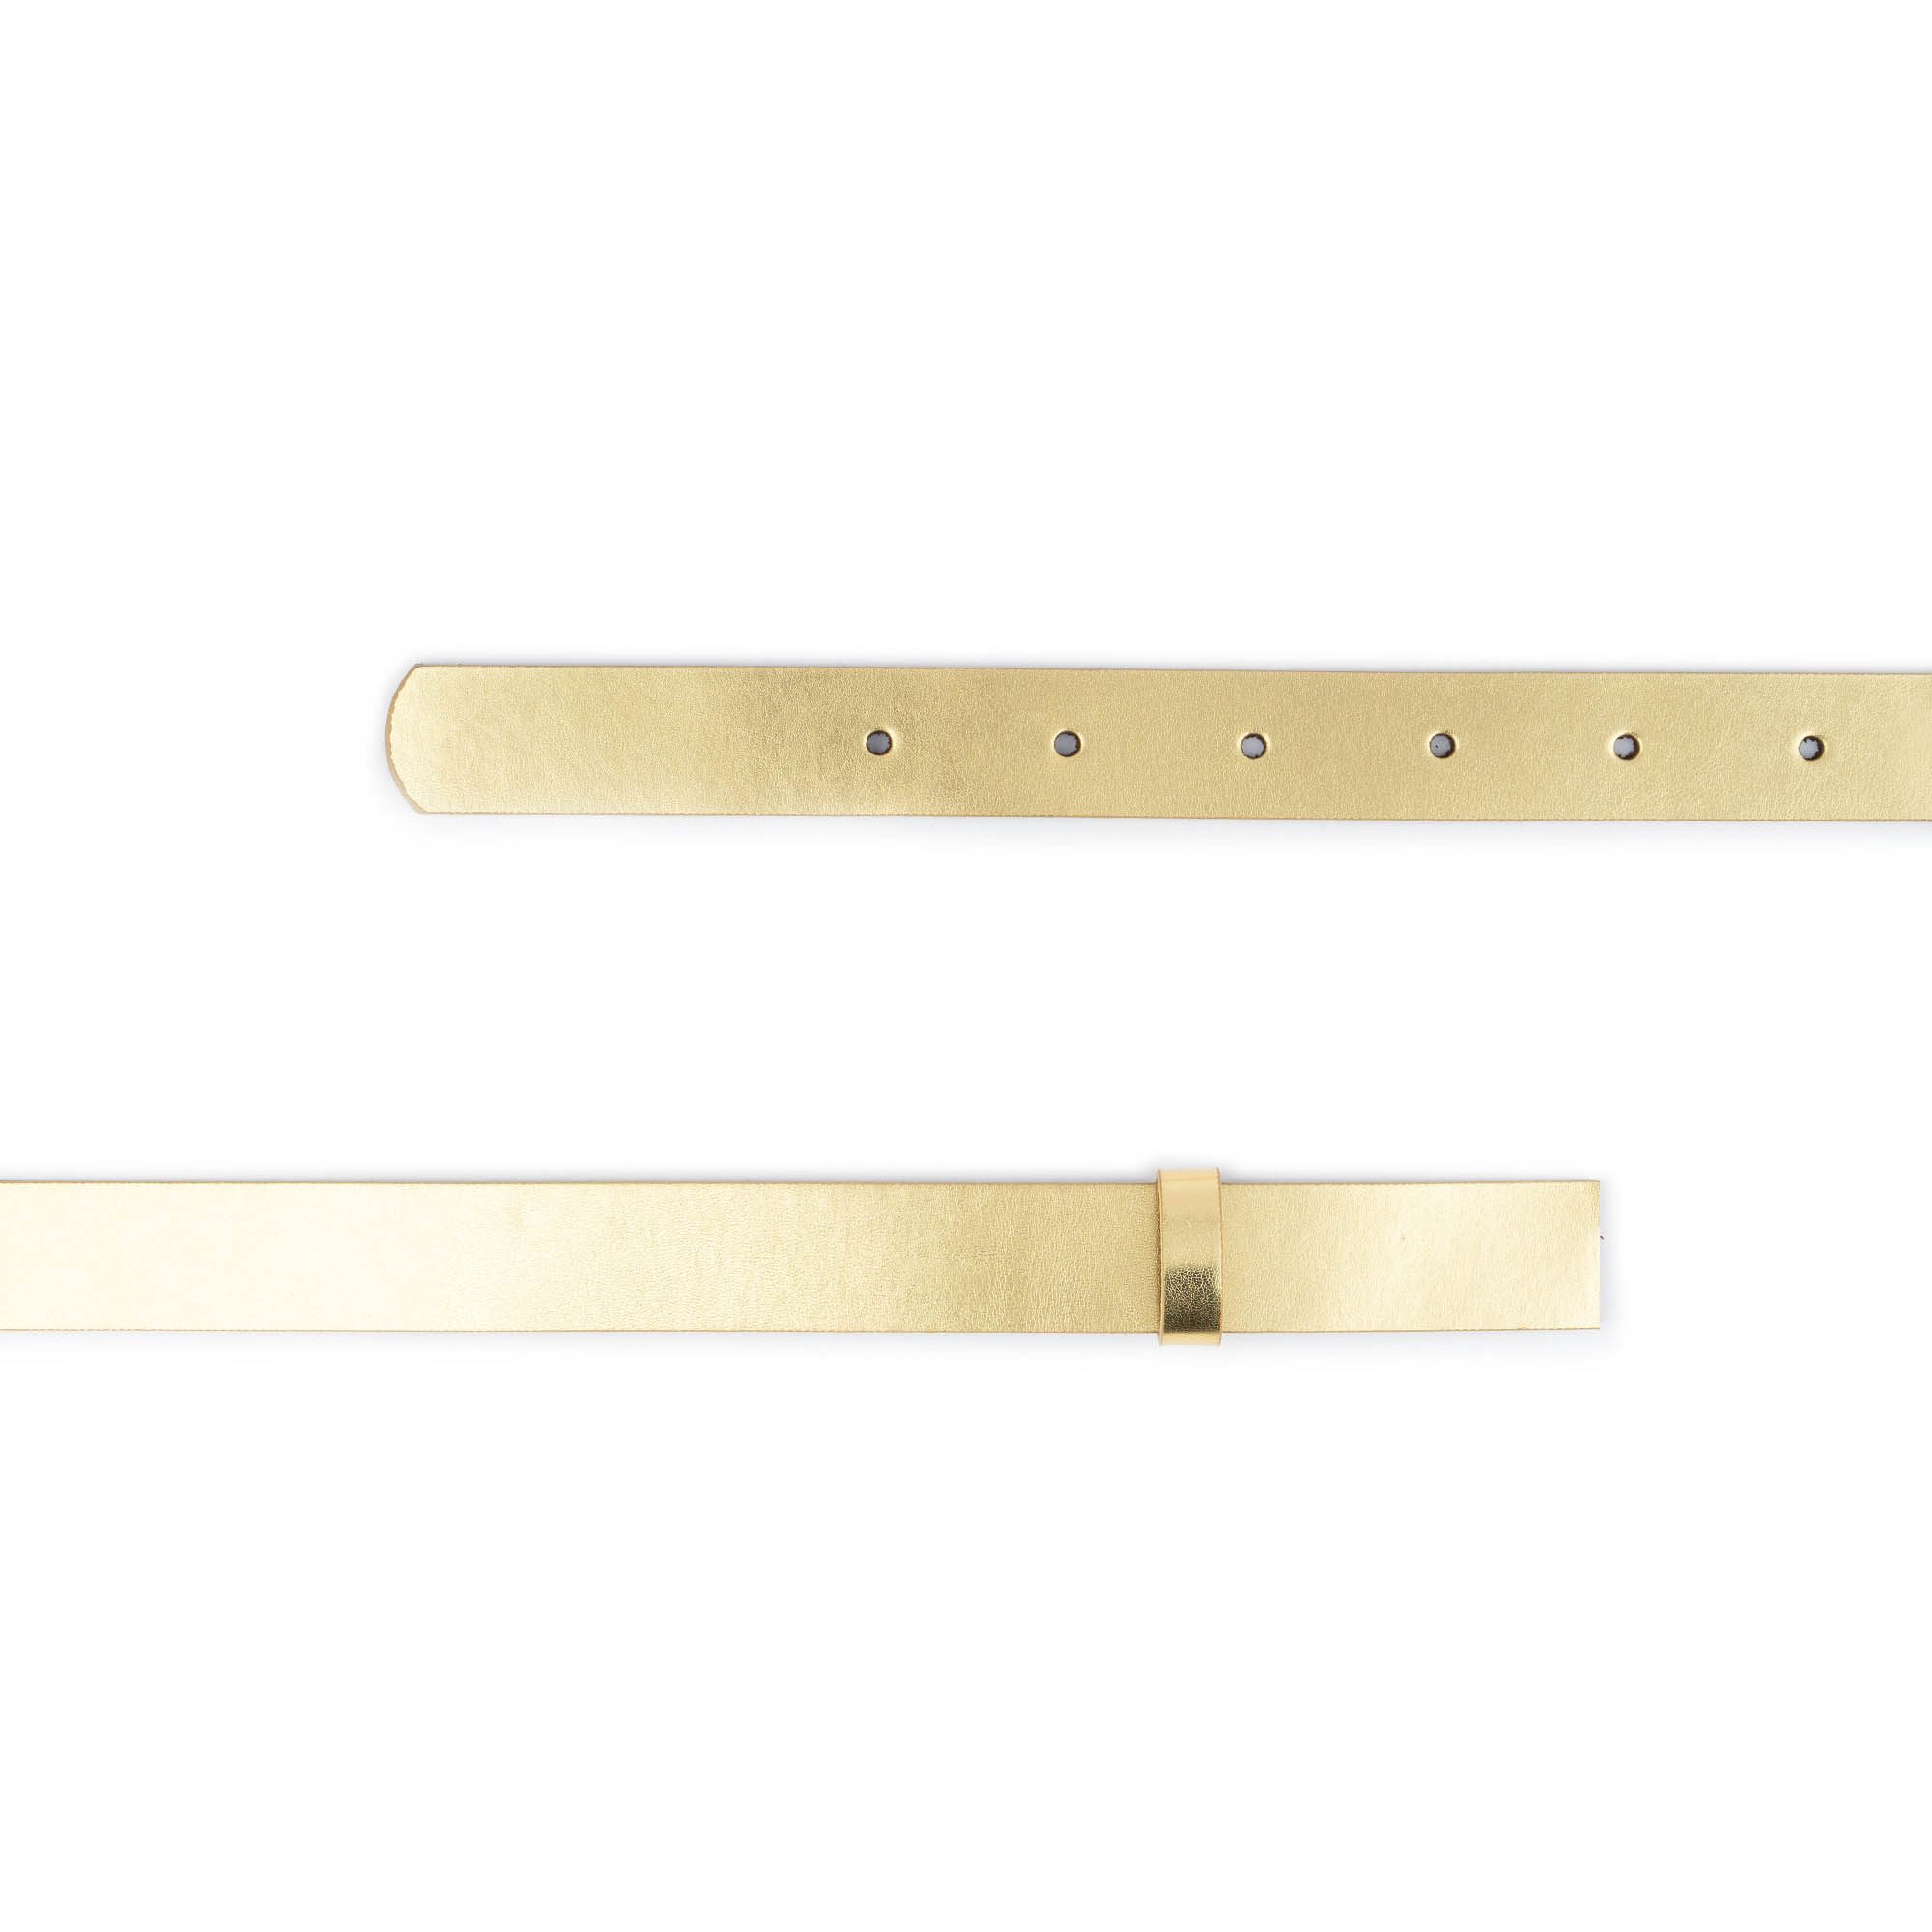 Buy Gold Belt Strap For Buckles - Leather Replacement 1 Inch